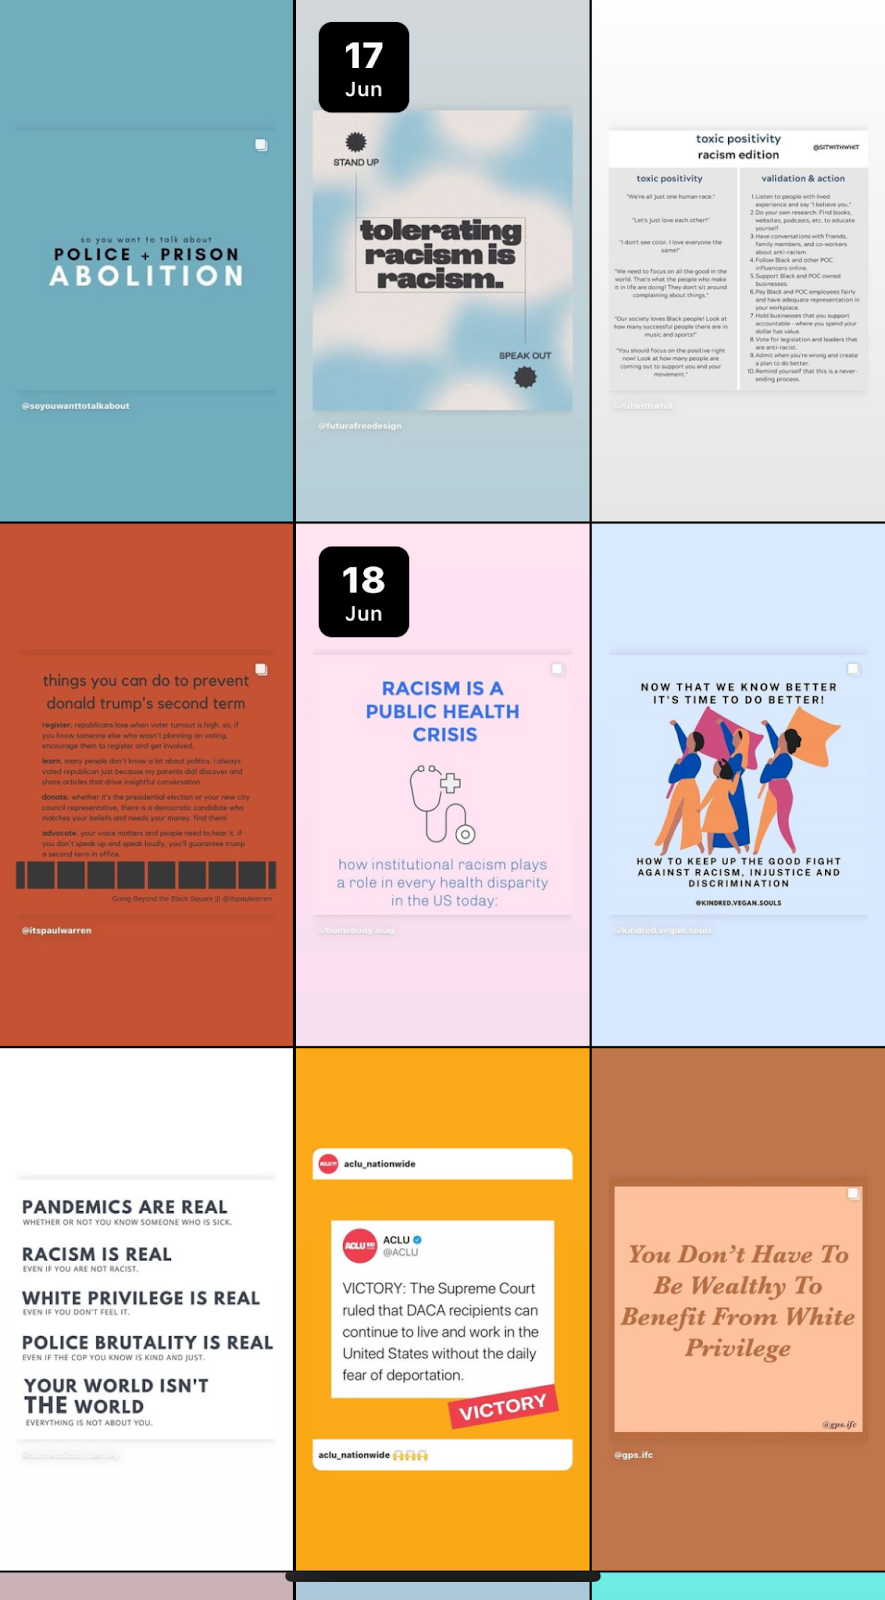 A picture of a grid of past Instagram stories, with each of the grids being a different infographic that was posted. Colorful and full of actionable taglines.